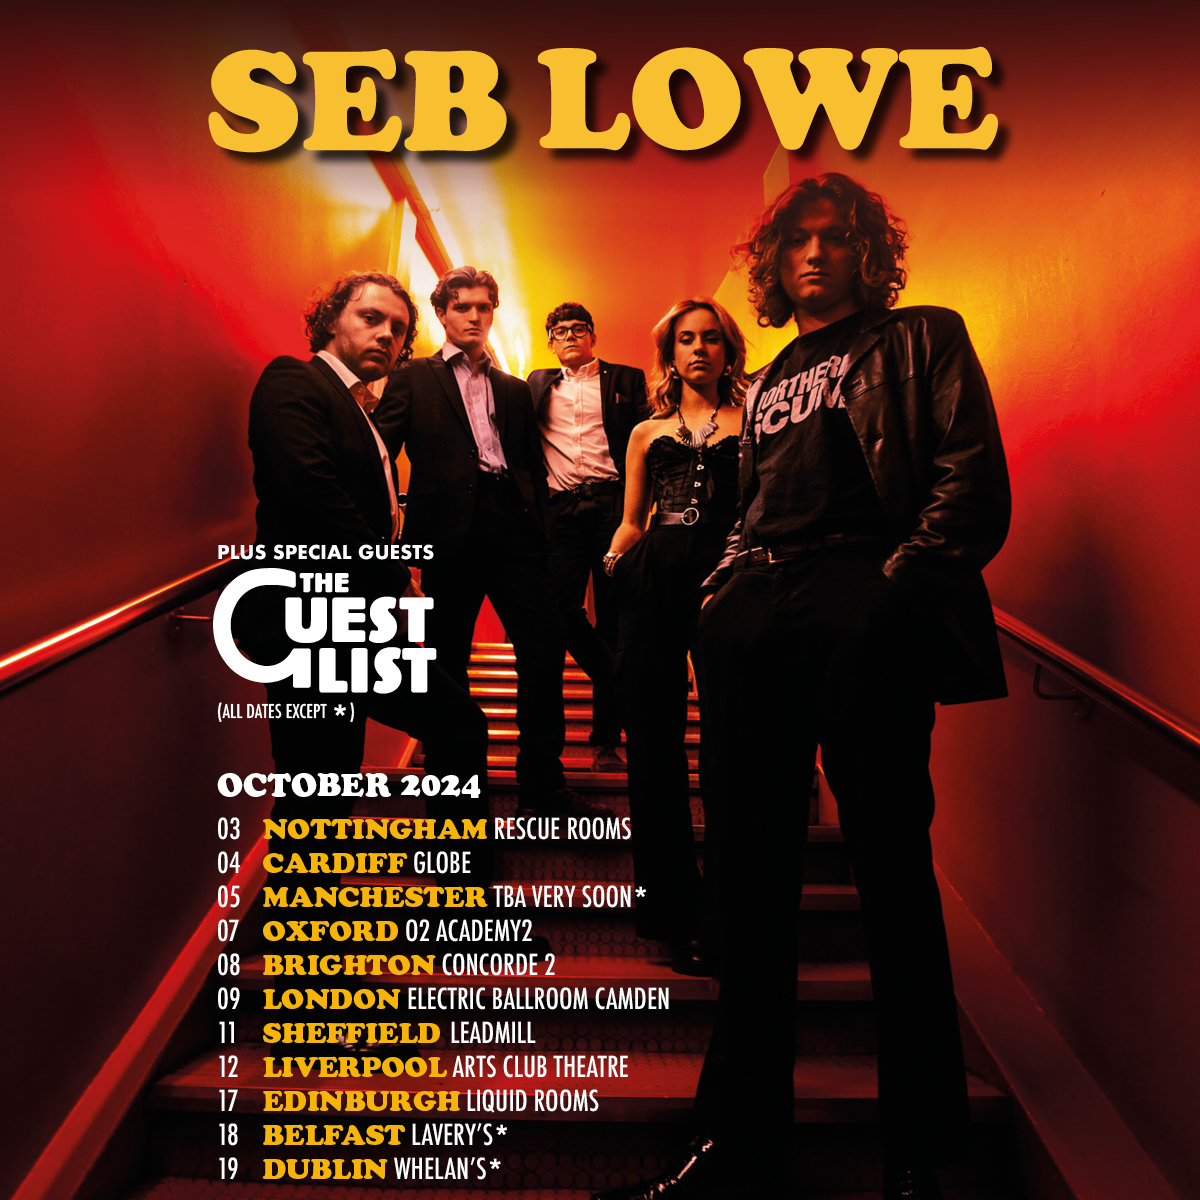 Priority Tickets available now for @seb_lowe_music live in Oxford - Monday 07 October 👉 amg-venues.com/eXZV50Ryza5